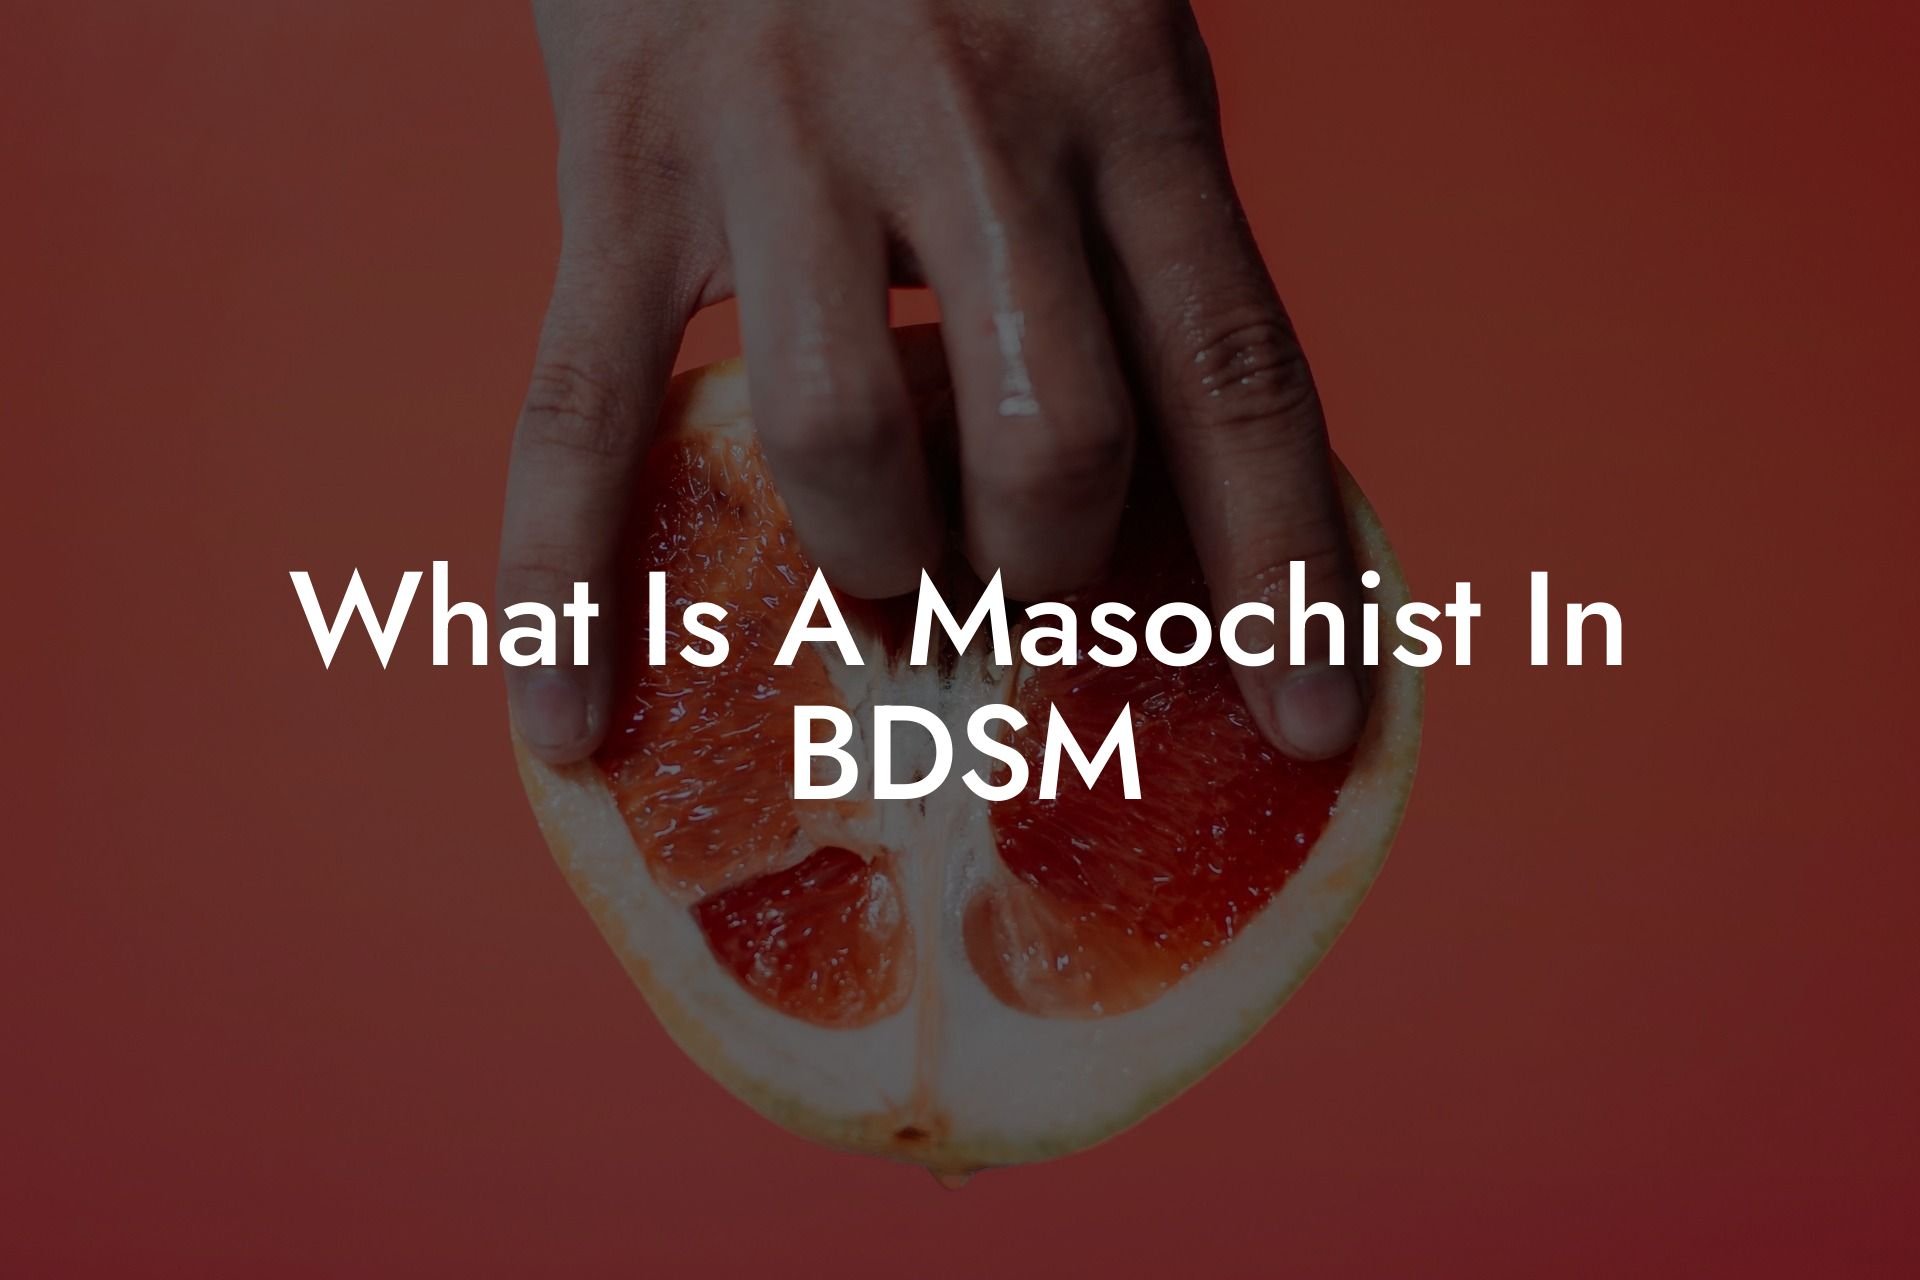 What Is A Masochist In BDSM